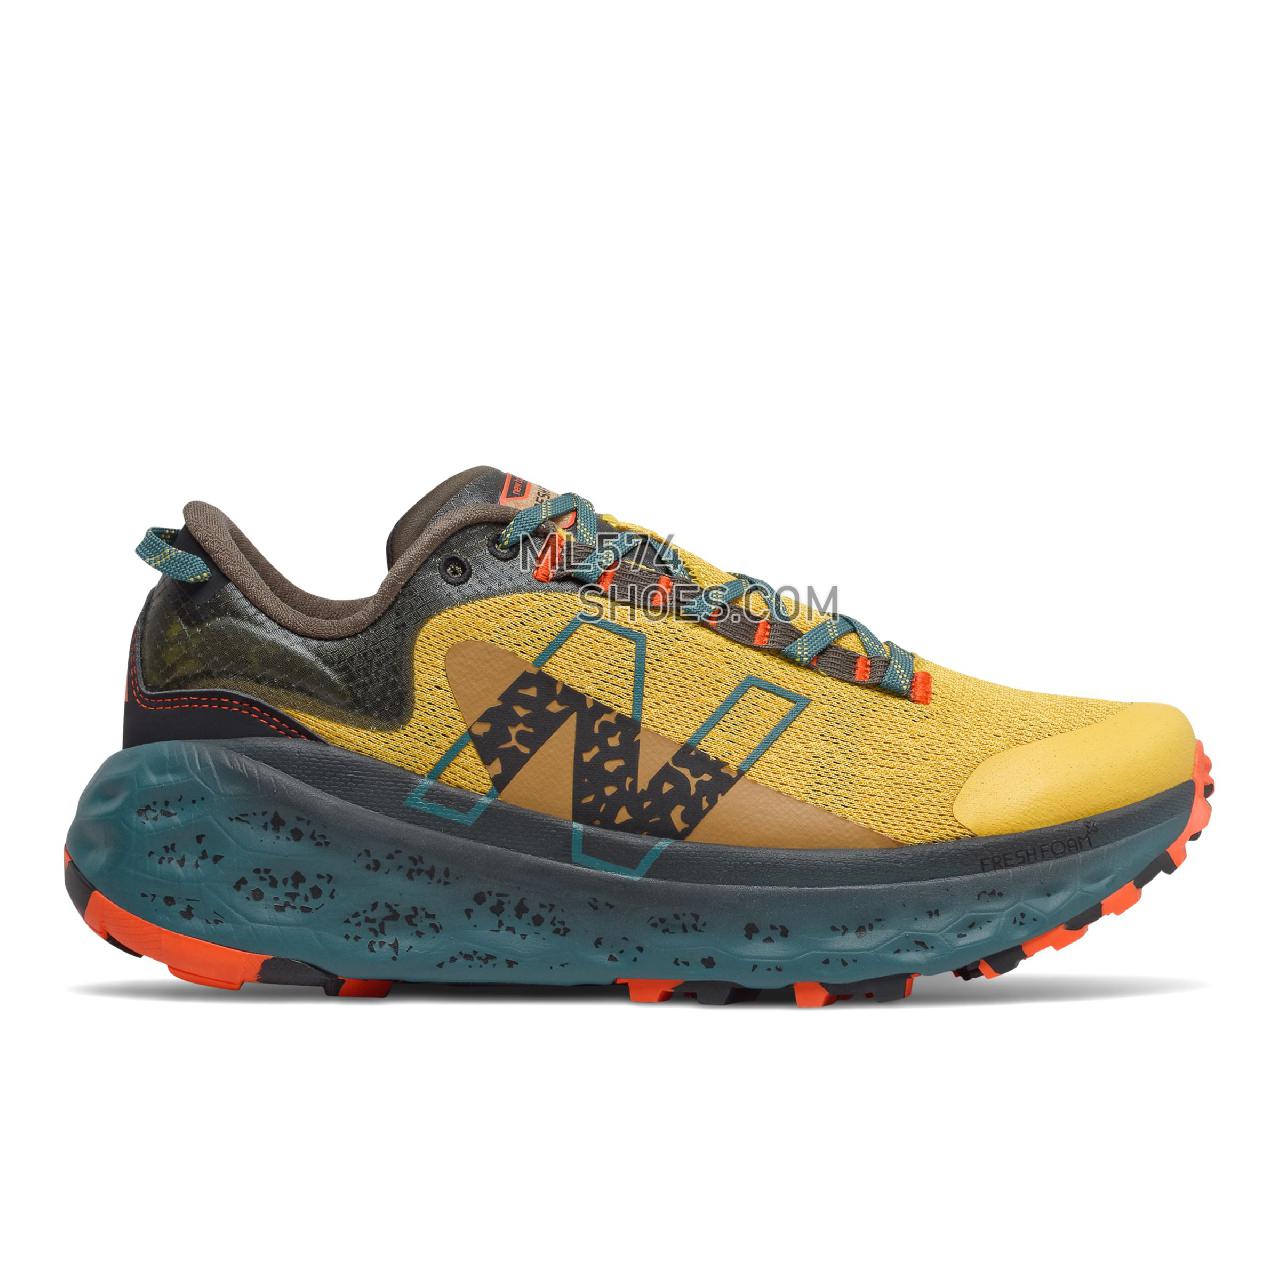 New Balance Fresh Foam X More Trail v2 - Men's Fuelcell Sleek And LightWeight - Harvest Gold with Mountain Teal - MTMORLH2